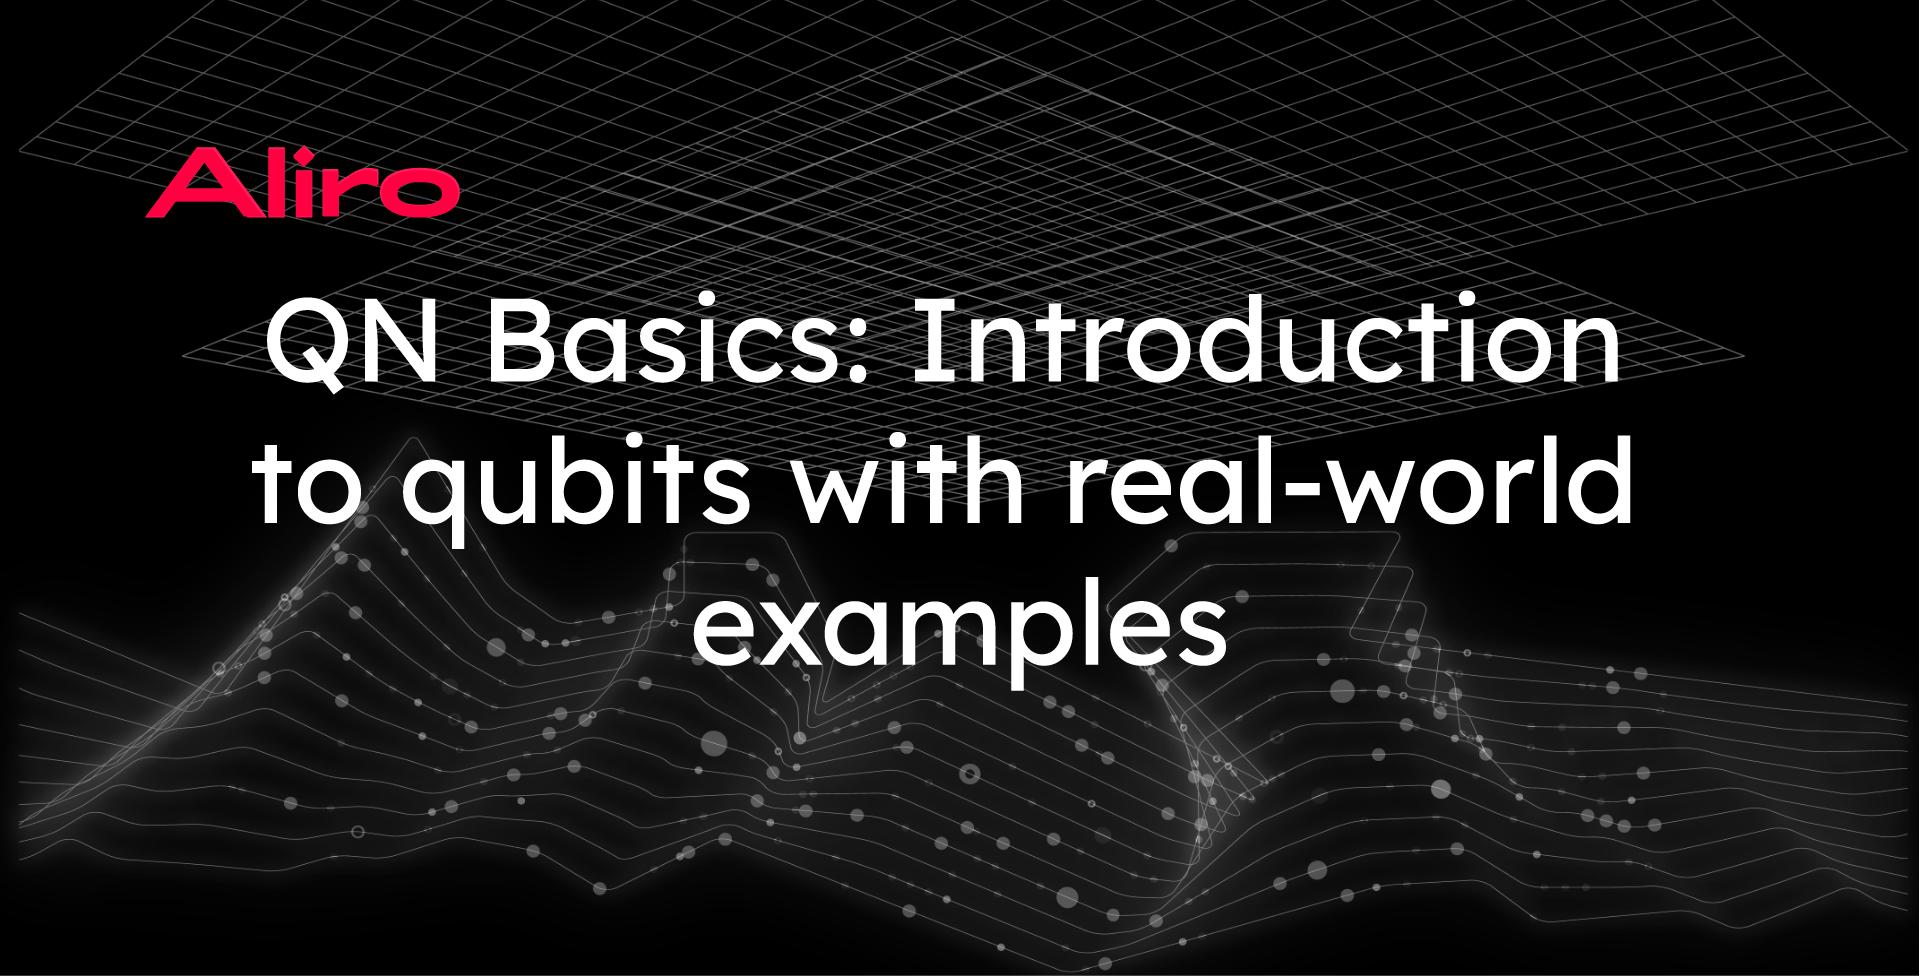 QN Basics: Introduction to qubits with real-world examples